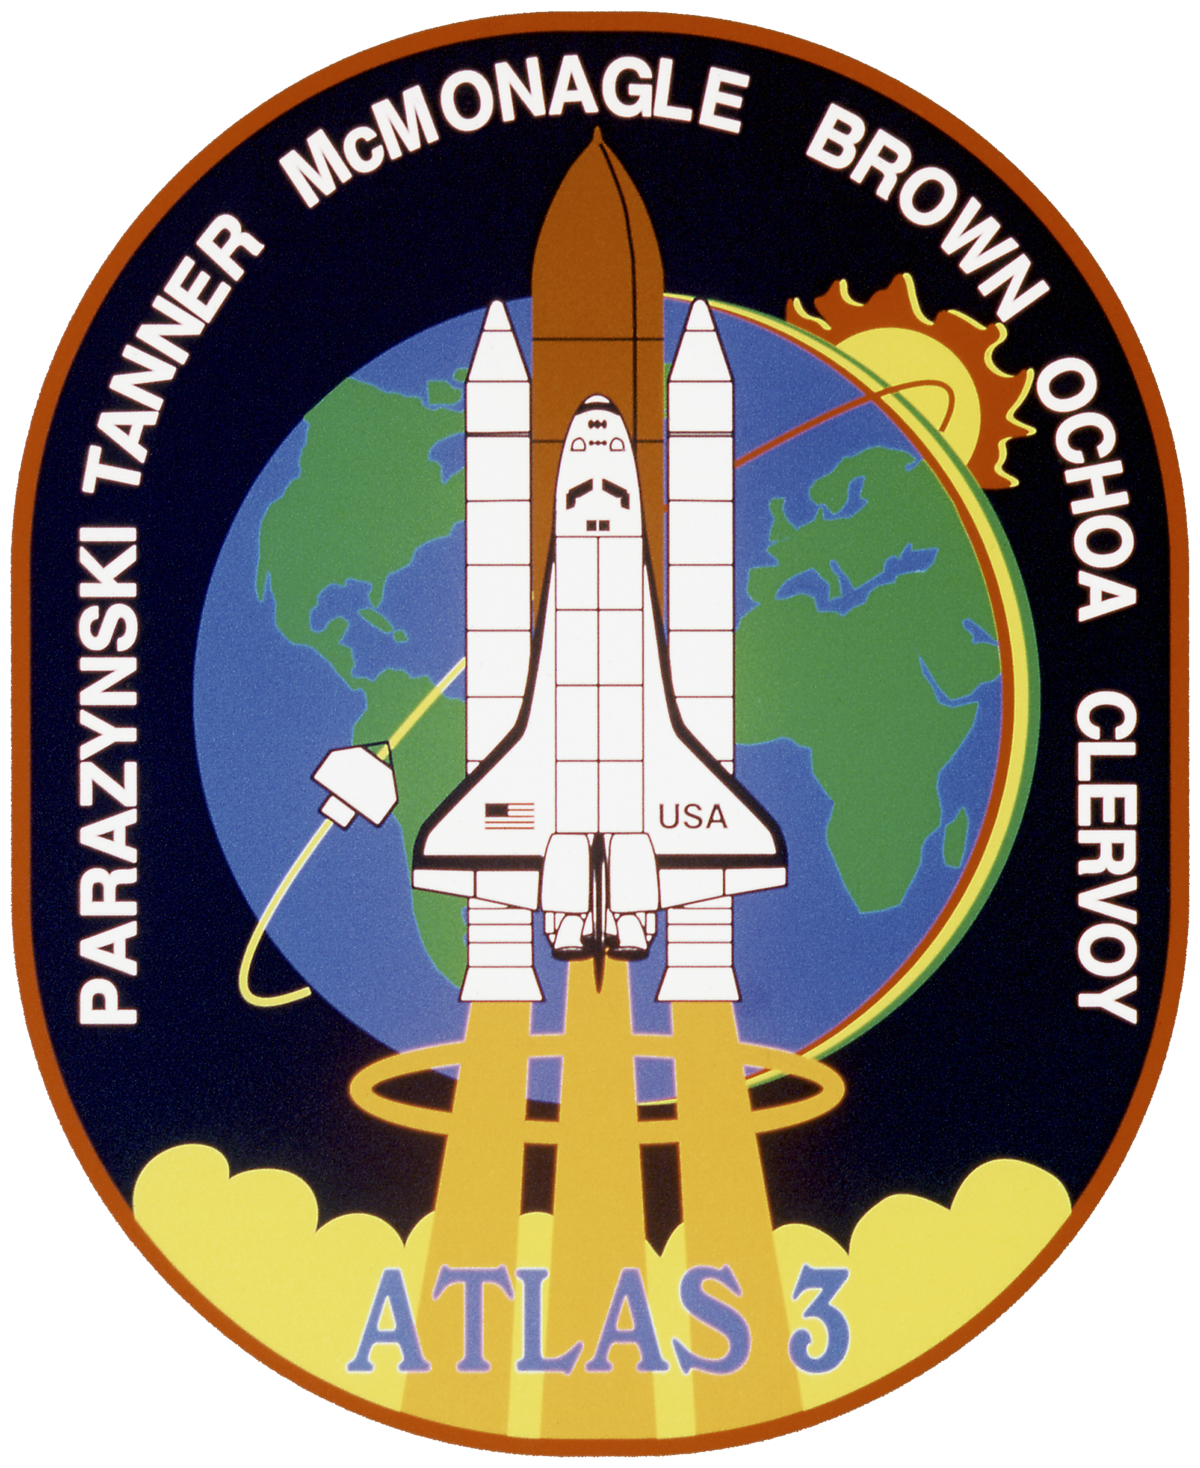 Sts-66-patch.png